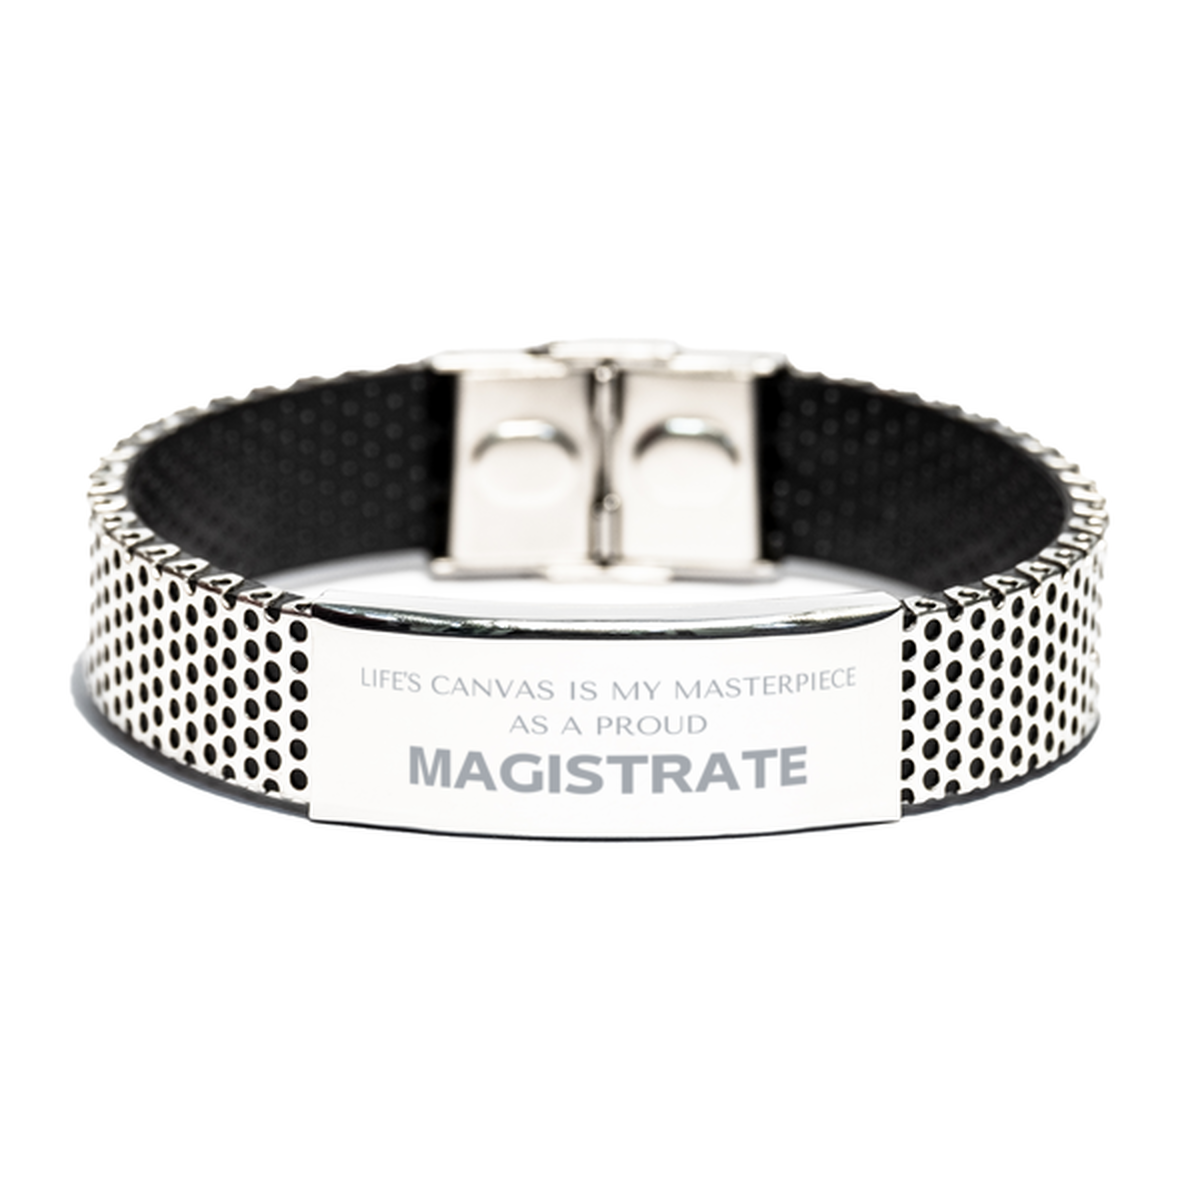 Proud Magistrate Gifts, Life's canvas is my masterpiece, Epic Birthday Christmas Unique Stainless Steel Bracelet For Magistrate, Coworkers, Men, Women, Friends